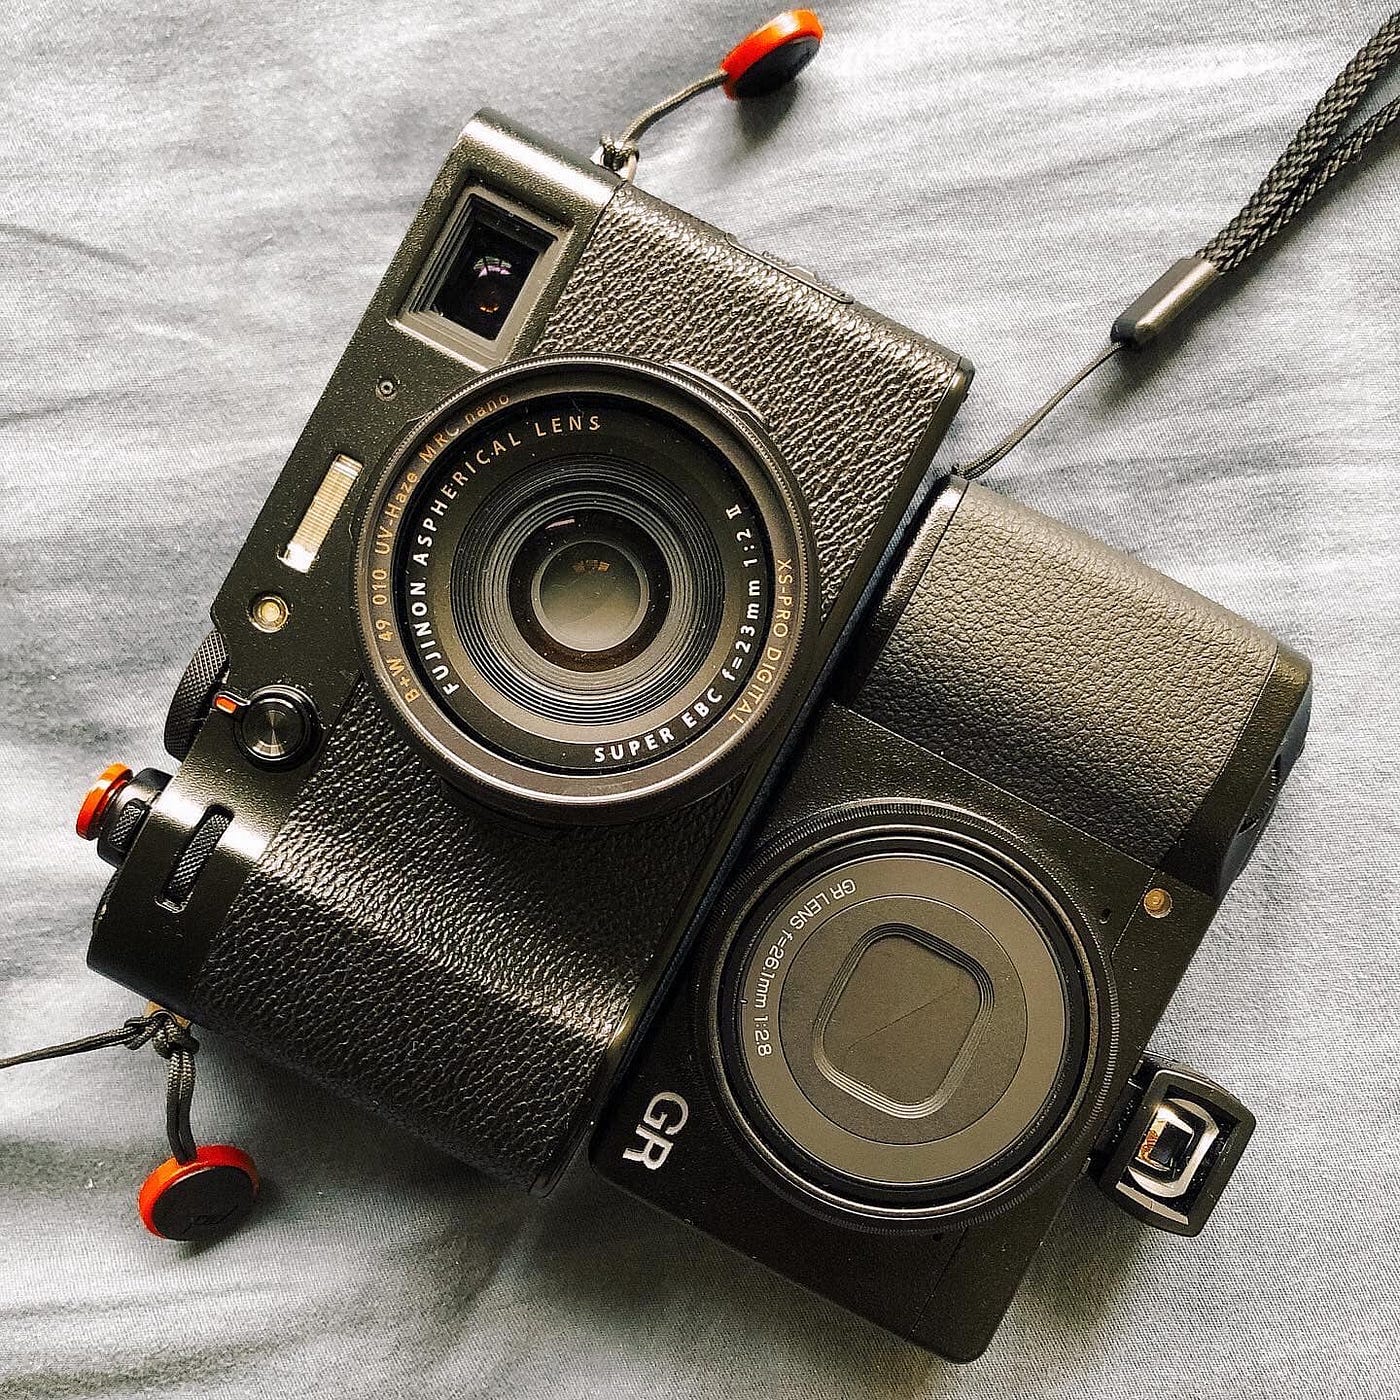 Fujifilm X100v vs Ricoh GR3x Which one Right for You? There are Blind A/B  Photos Test …The Design Concepts and Controls are completely different… |  by LI Sam | Rokkorxblog | Medium